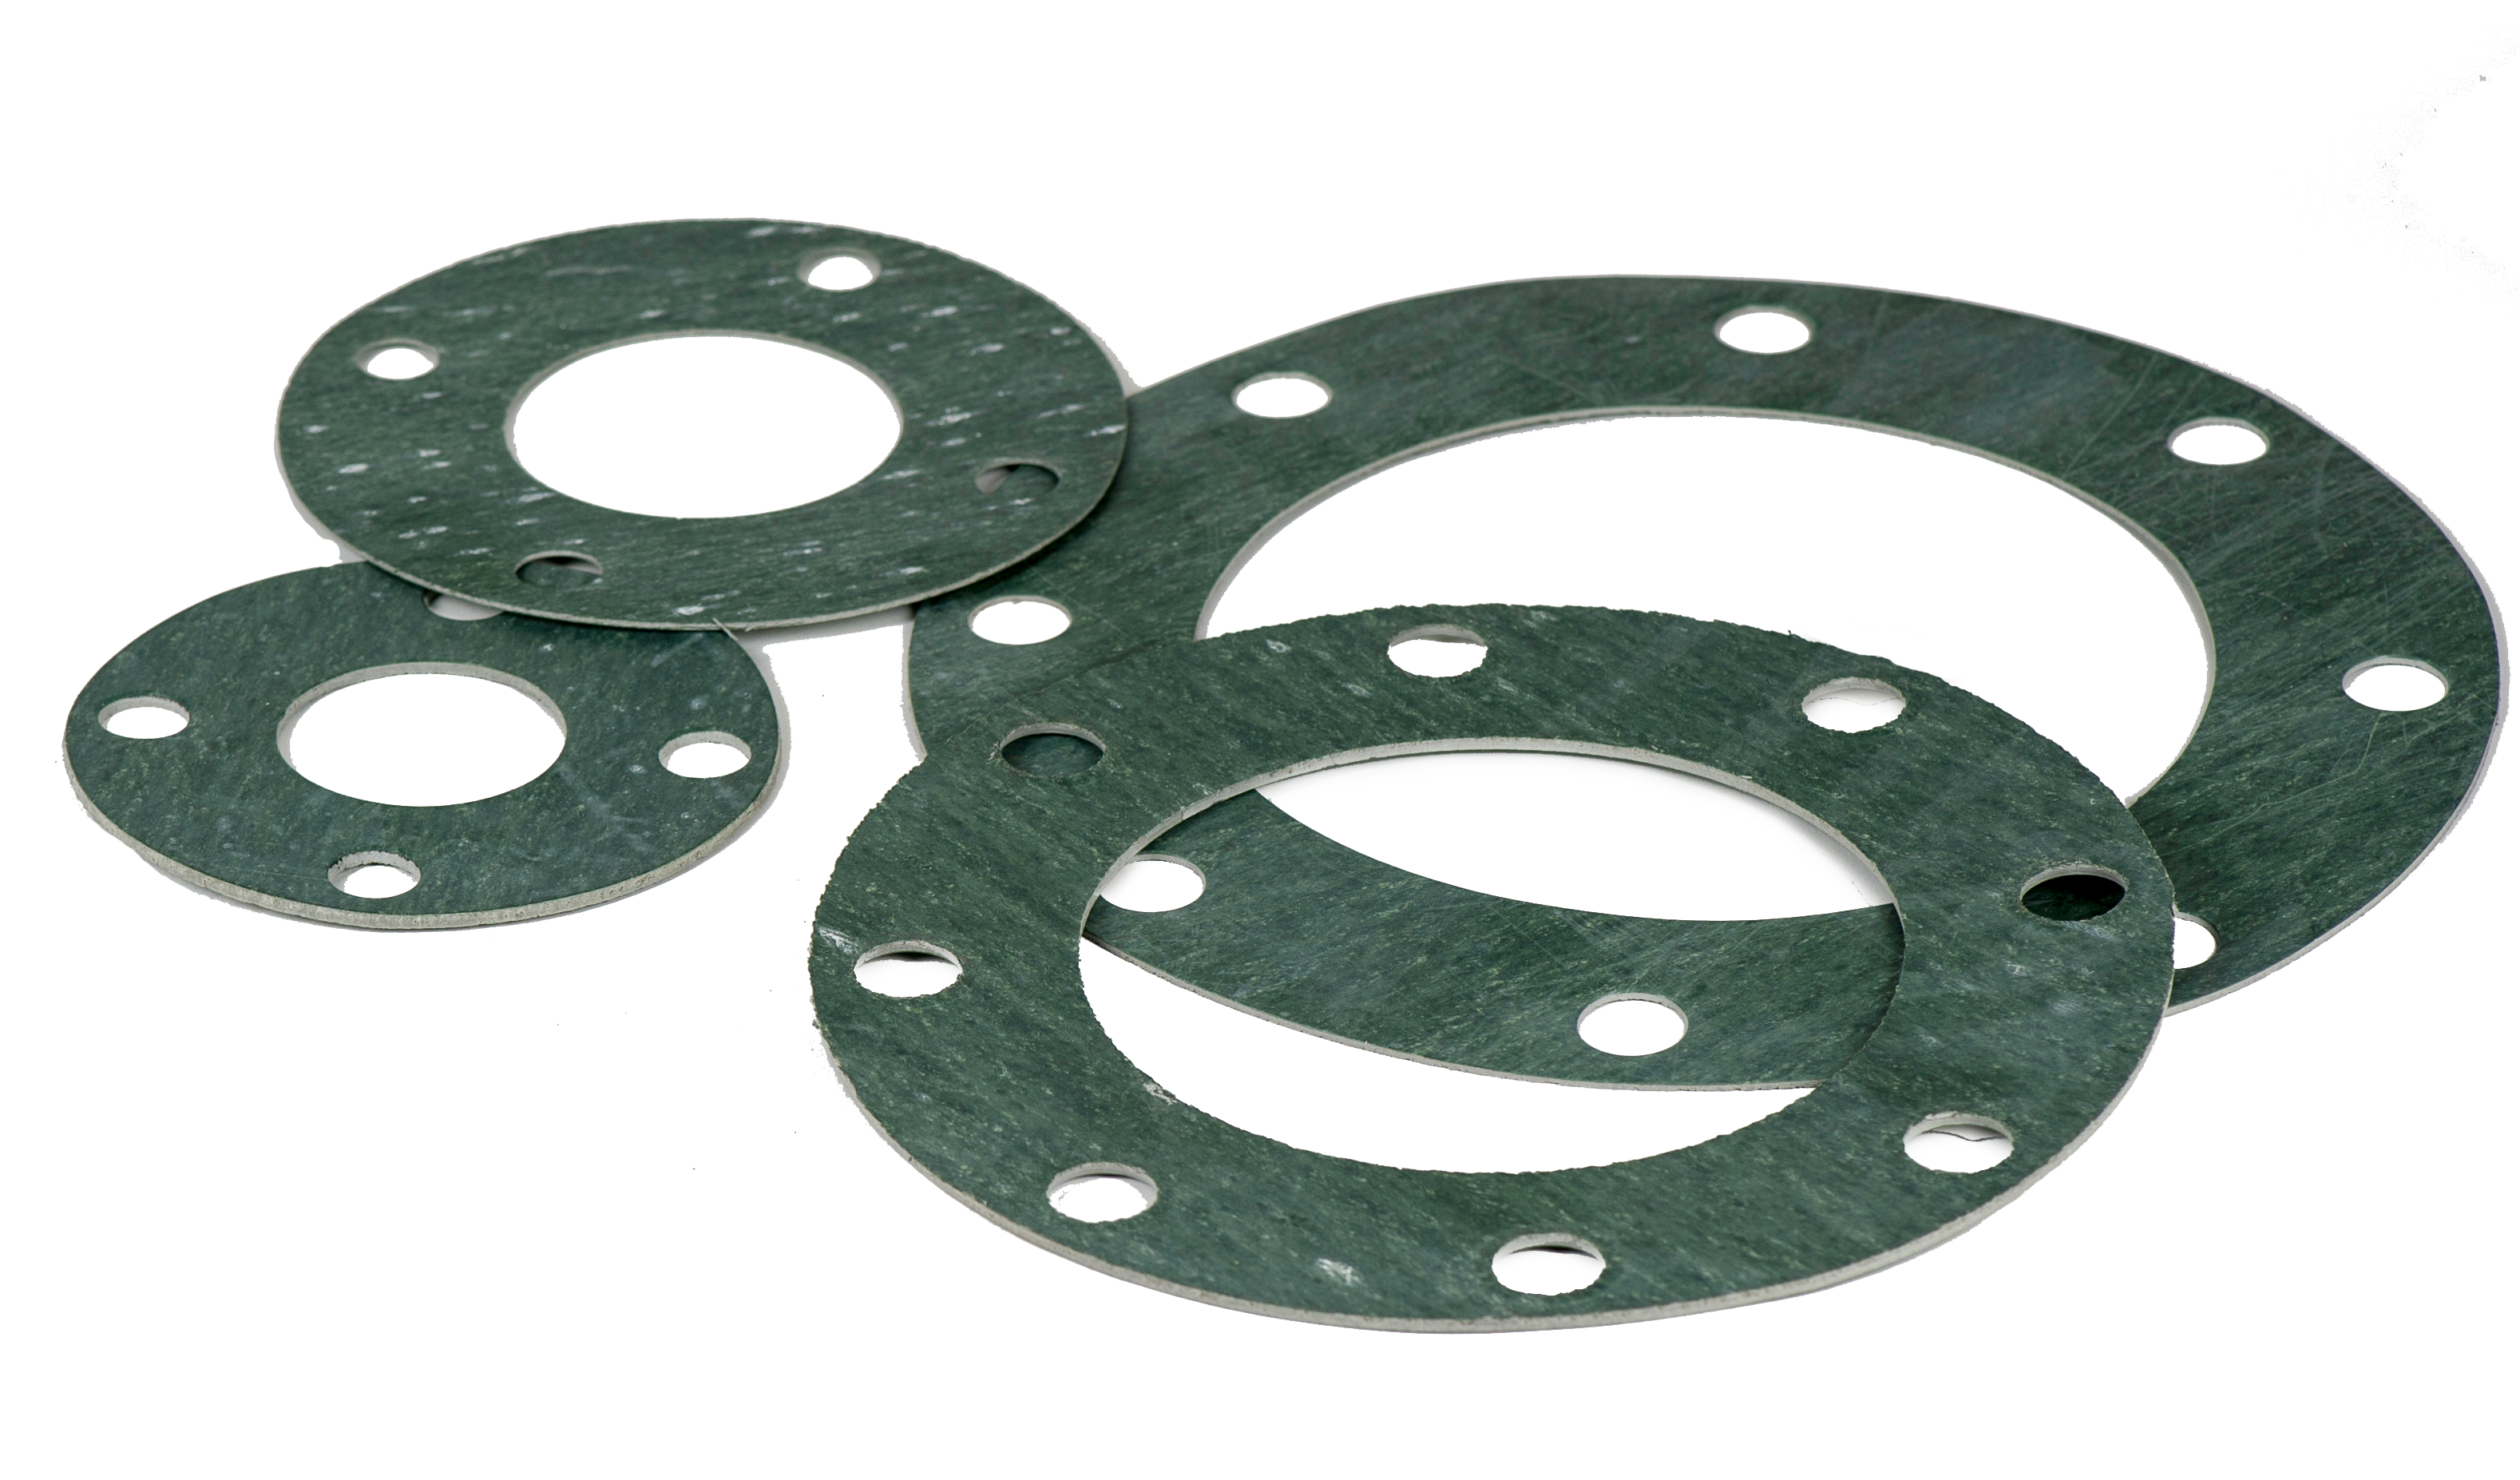 NEW PIPE VALVE FLANGE RUBBER RING GASKET PRESSURE TO 150Lb 10" PIPE SIZE